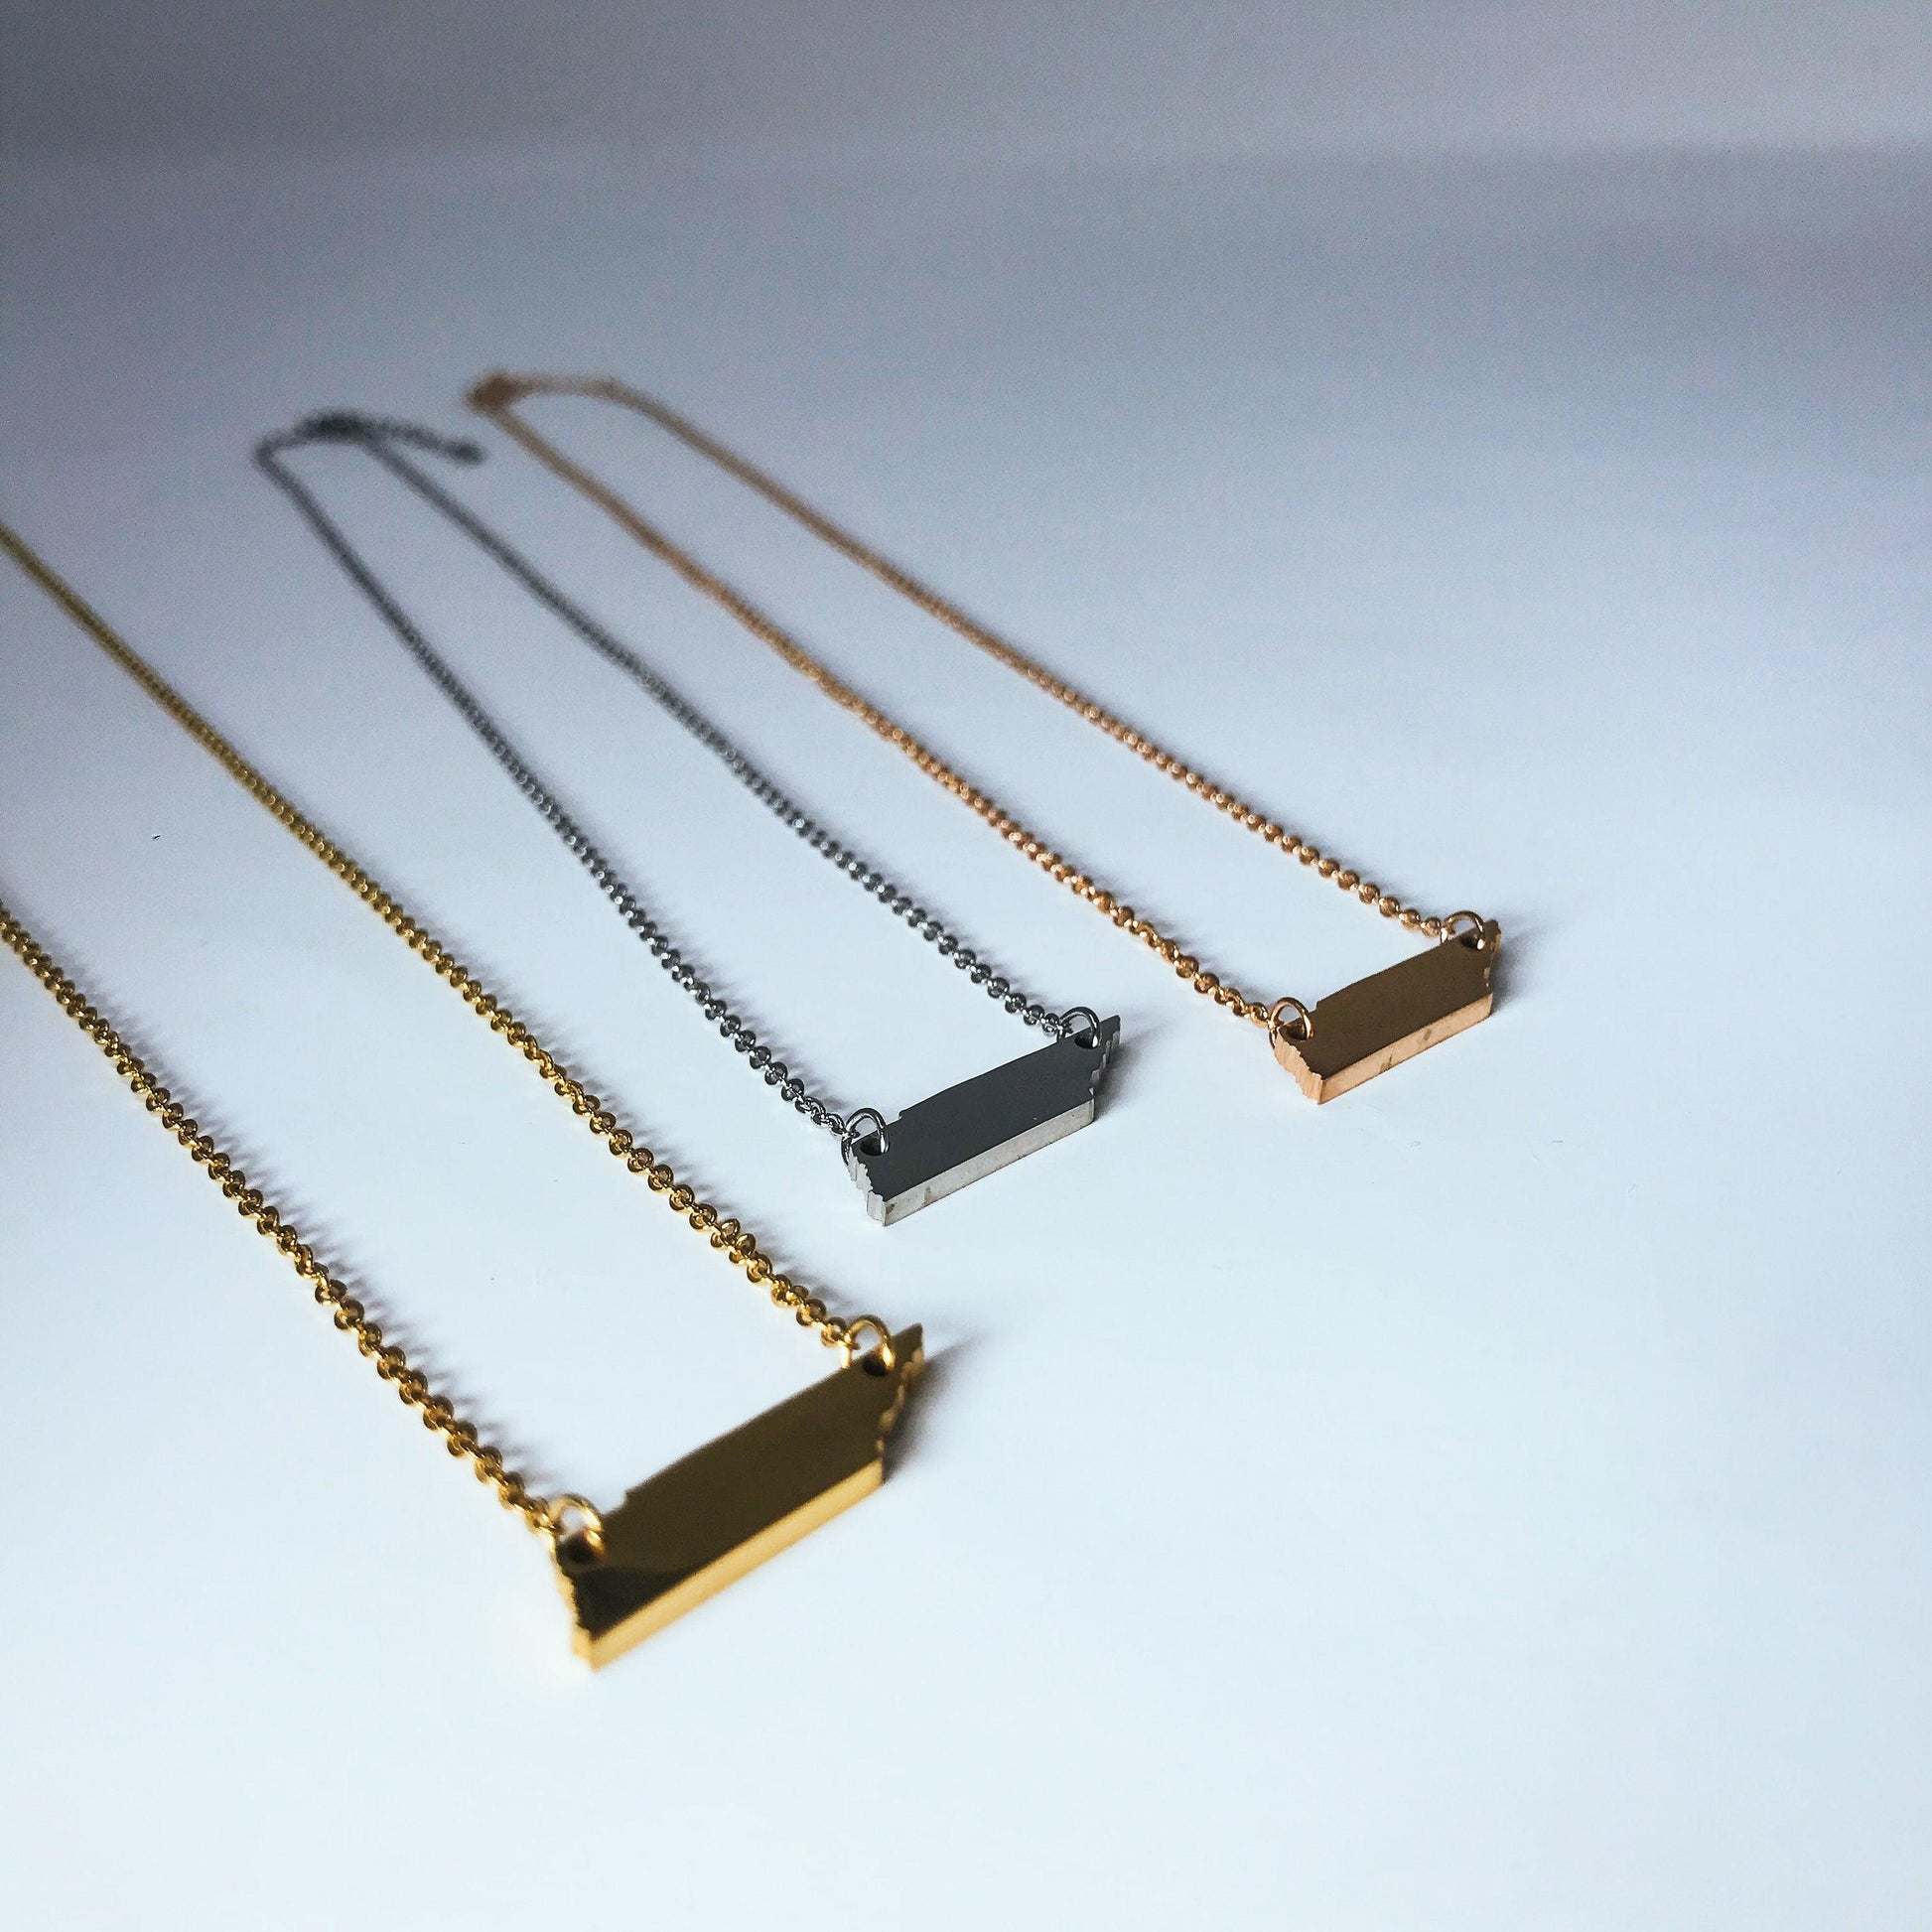 Tennessee State Silhouette Necklaces in 3 different colors: Gold, Silver & Rose Gold